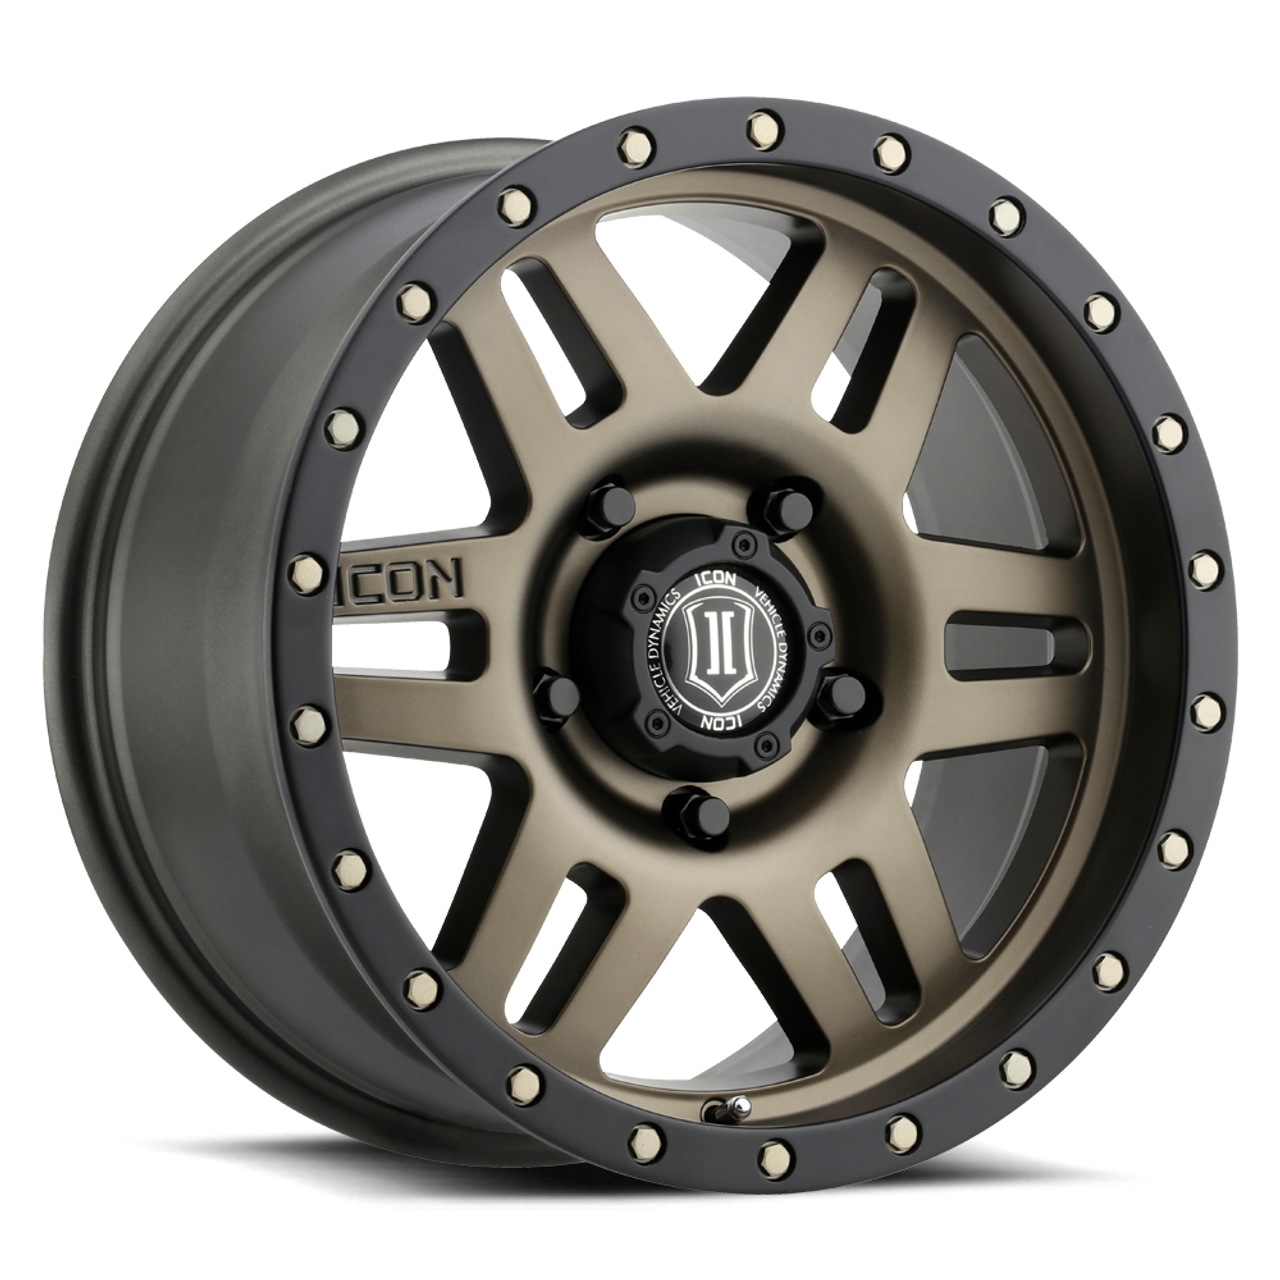 ICON Six Speed 17x8.5 5x150 25mm Offset 5.75in BS 116.5mm Bore Bronze Wheel - 1417855557BR